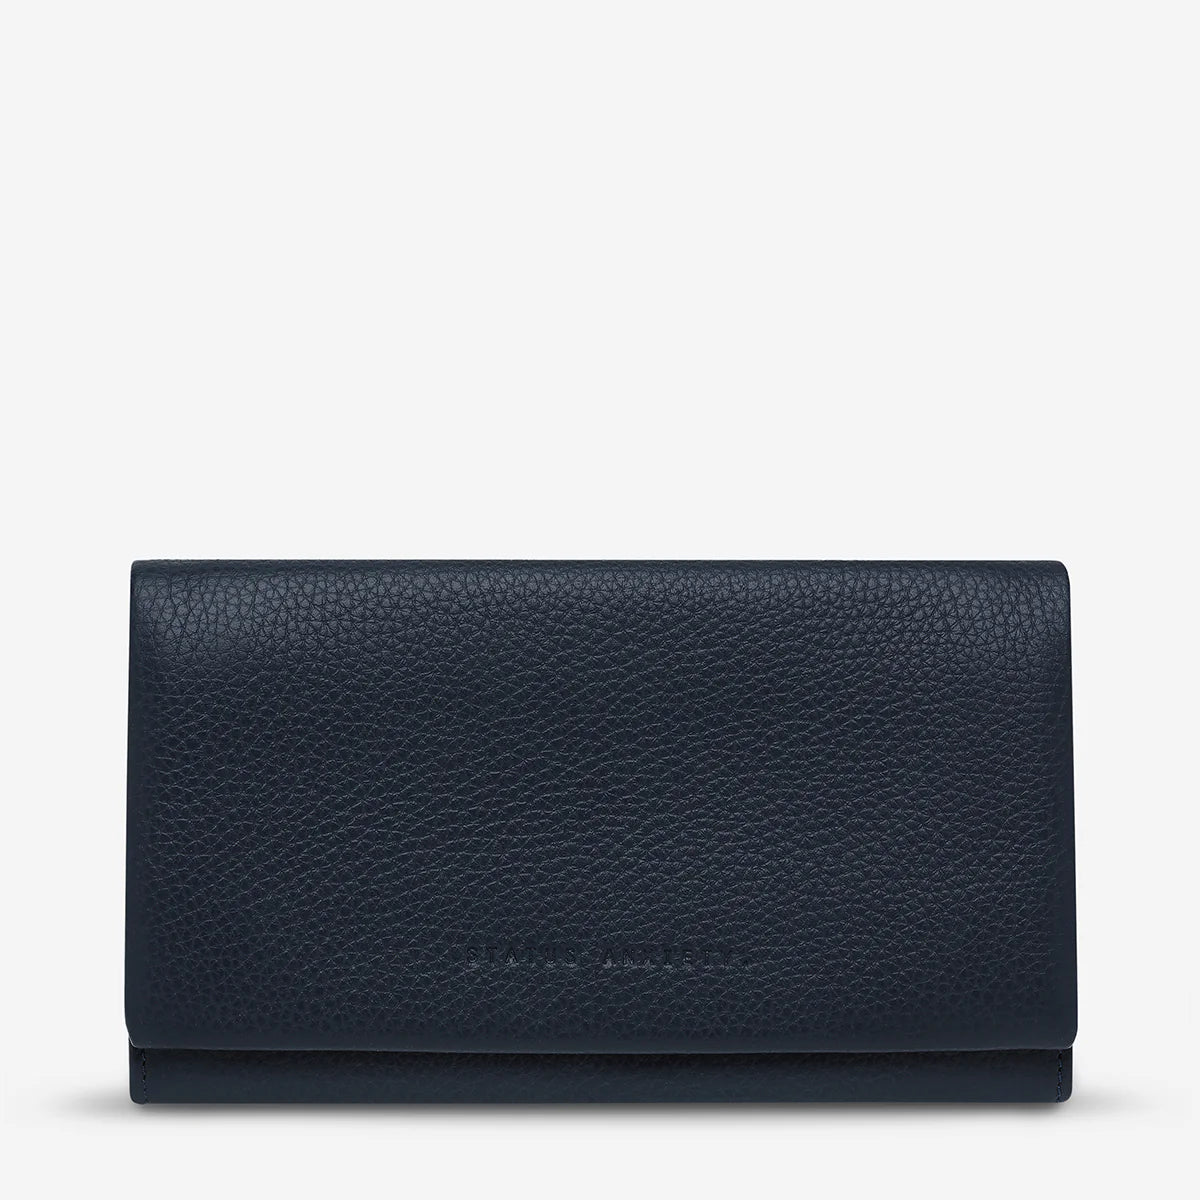 Status Anxiety | Nevermind Wallet